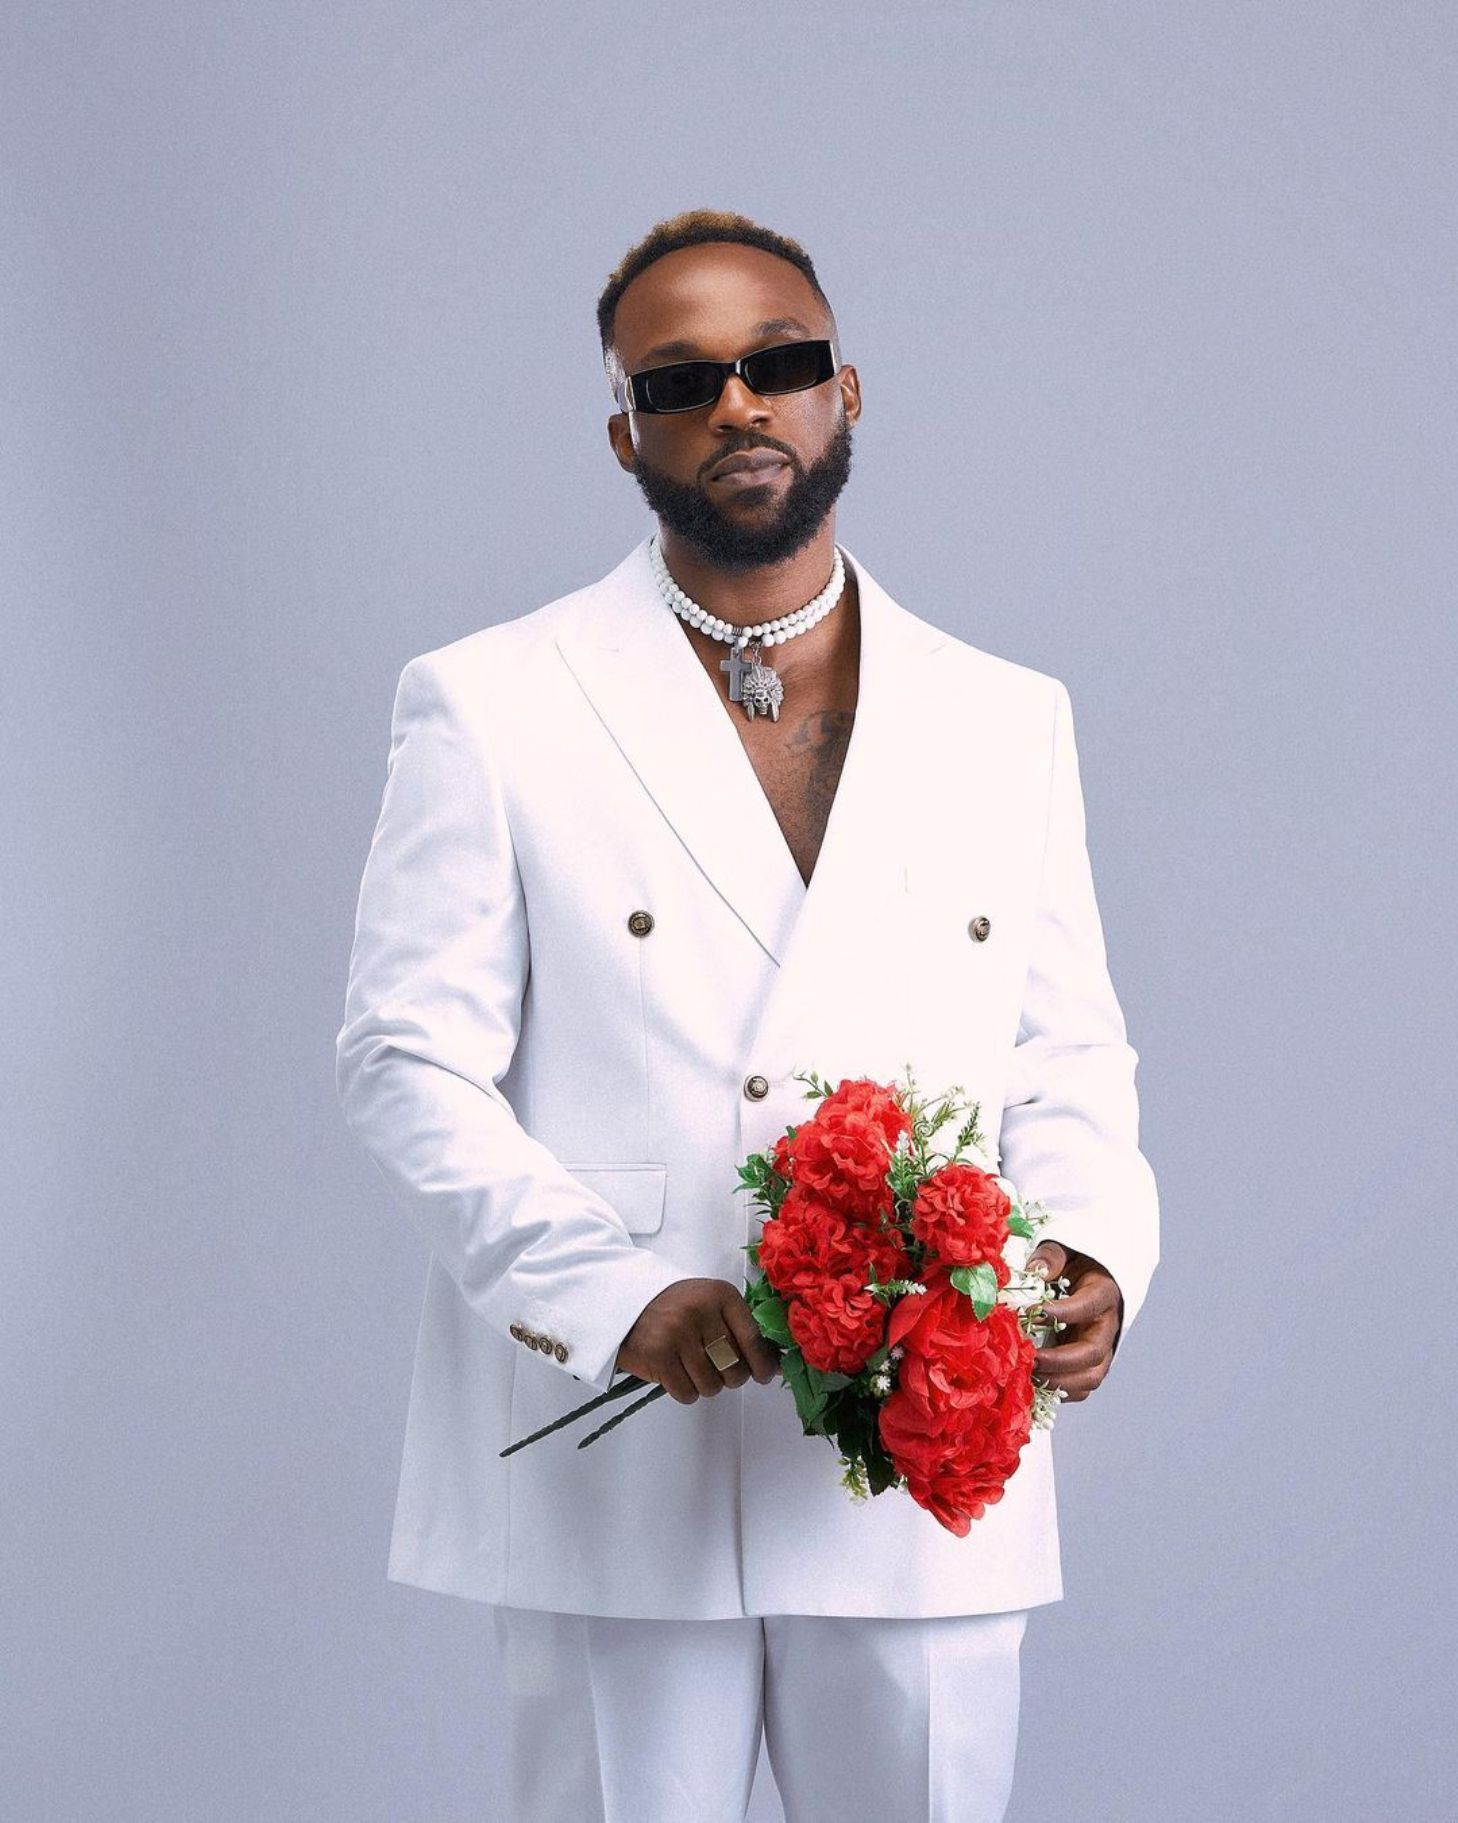 Pray for me to settle down – Iyanya tells fans